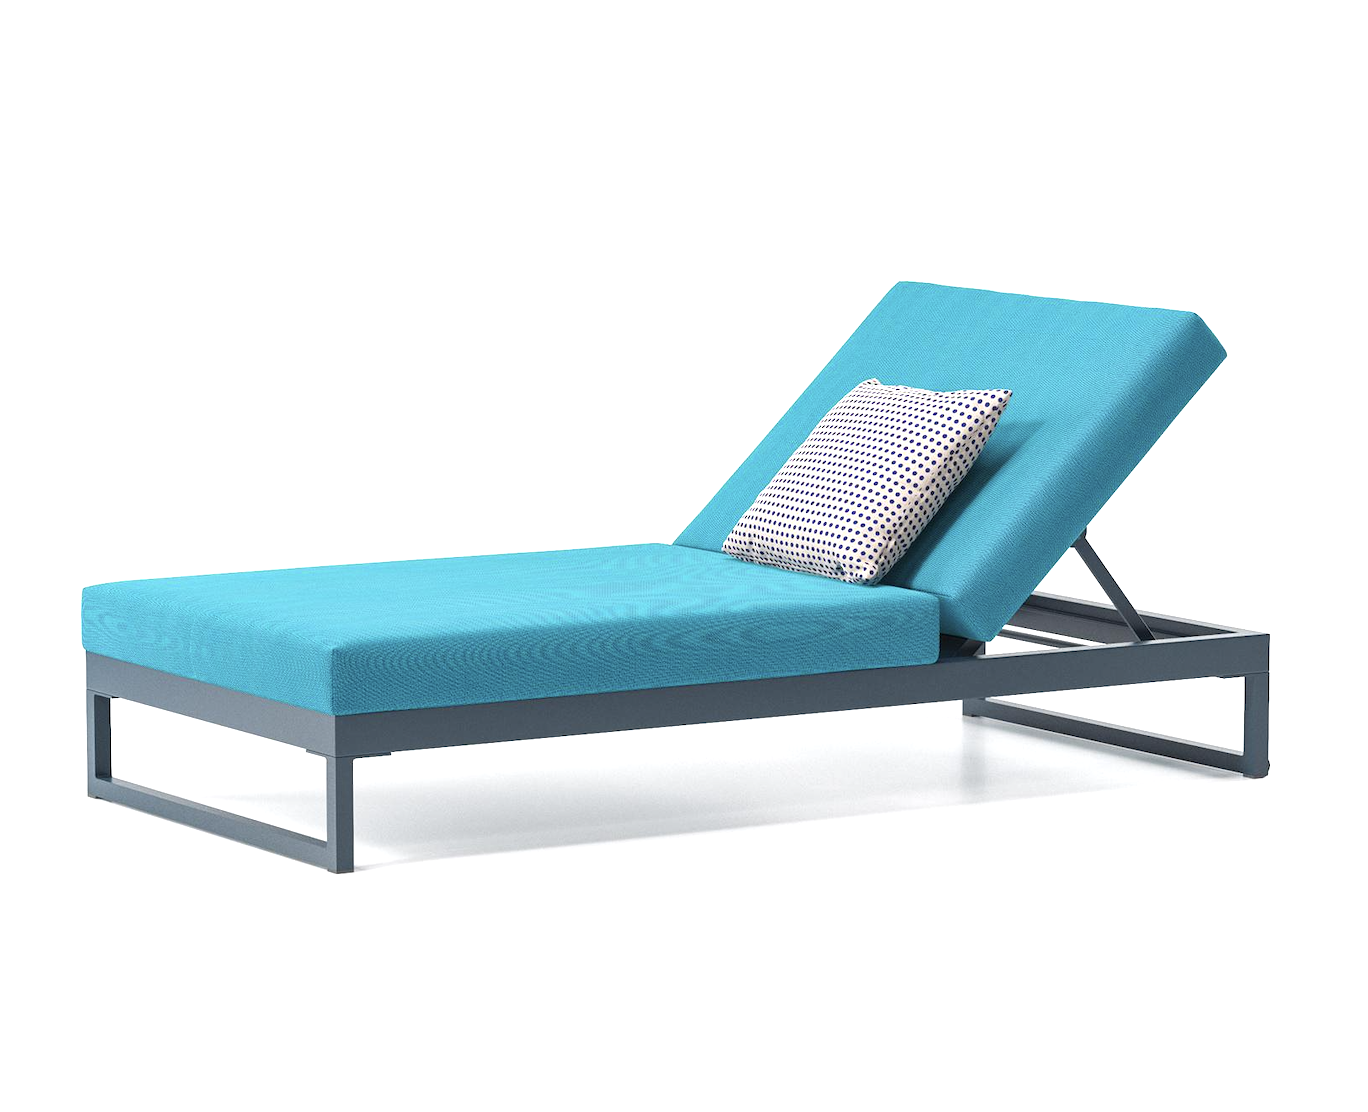 Product Image Landscape sunlounger with Legs